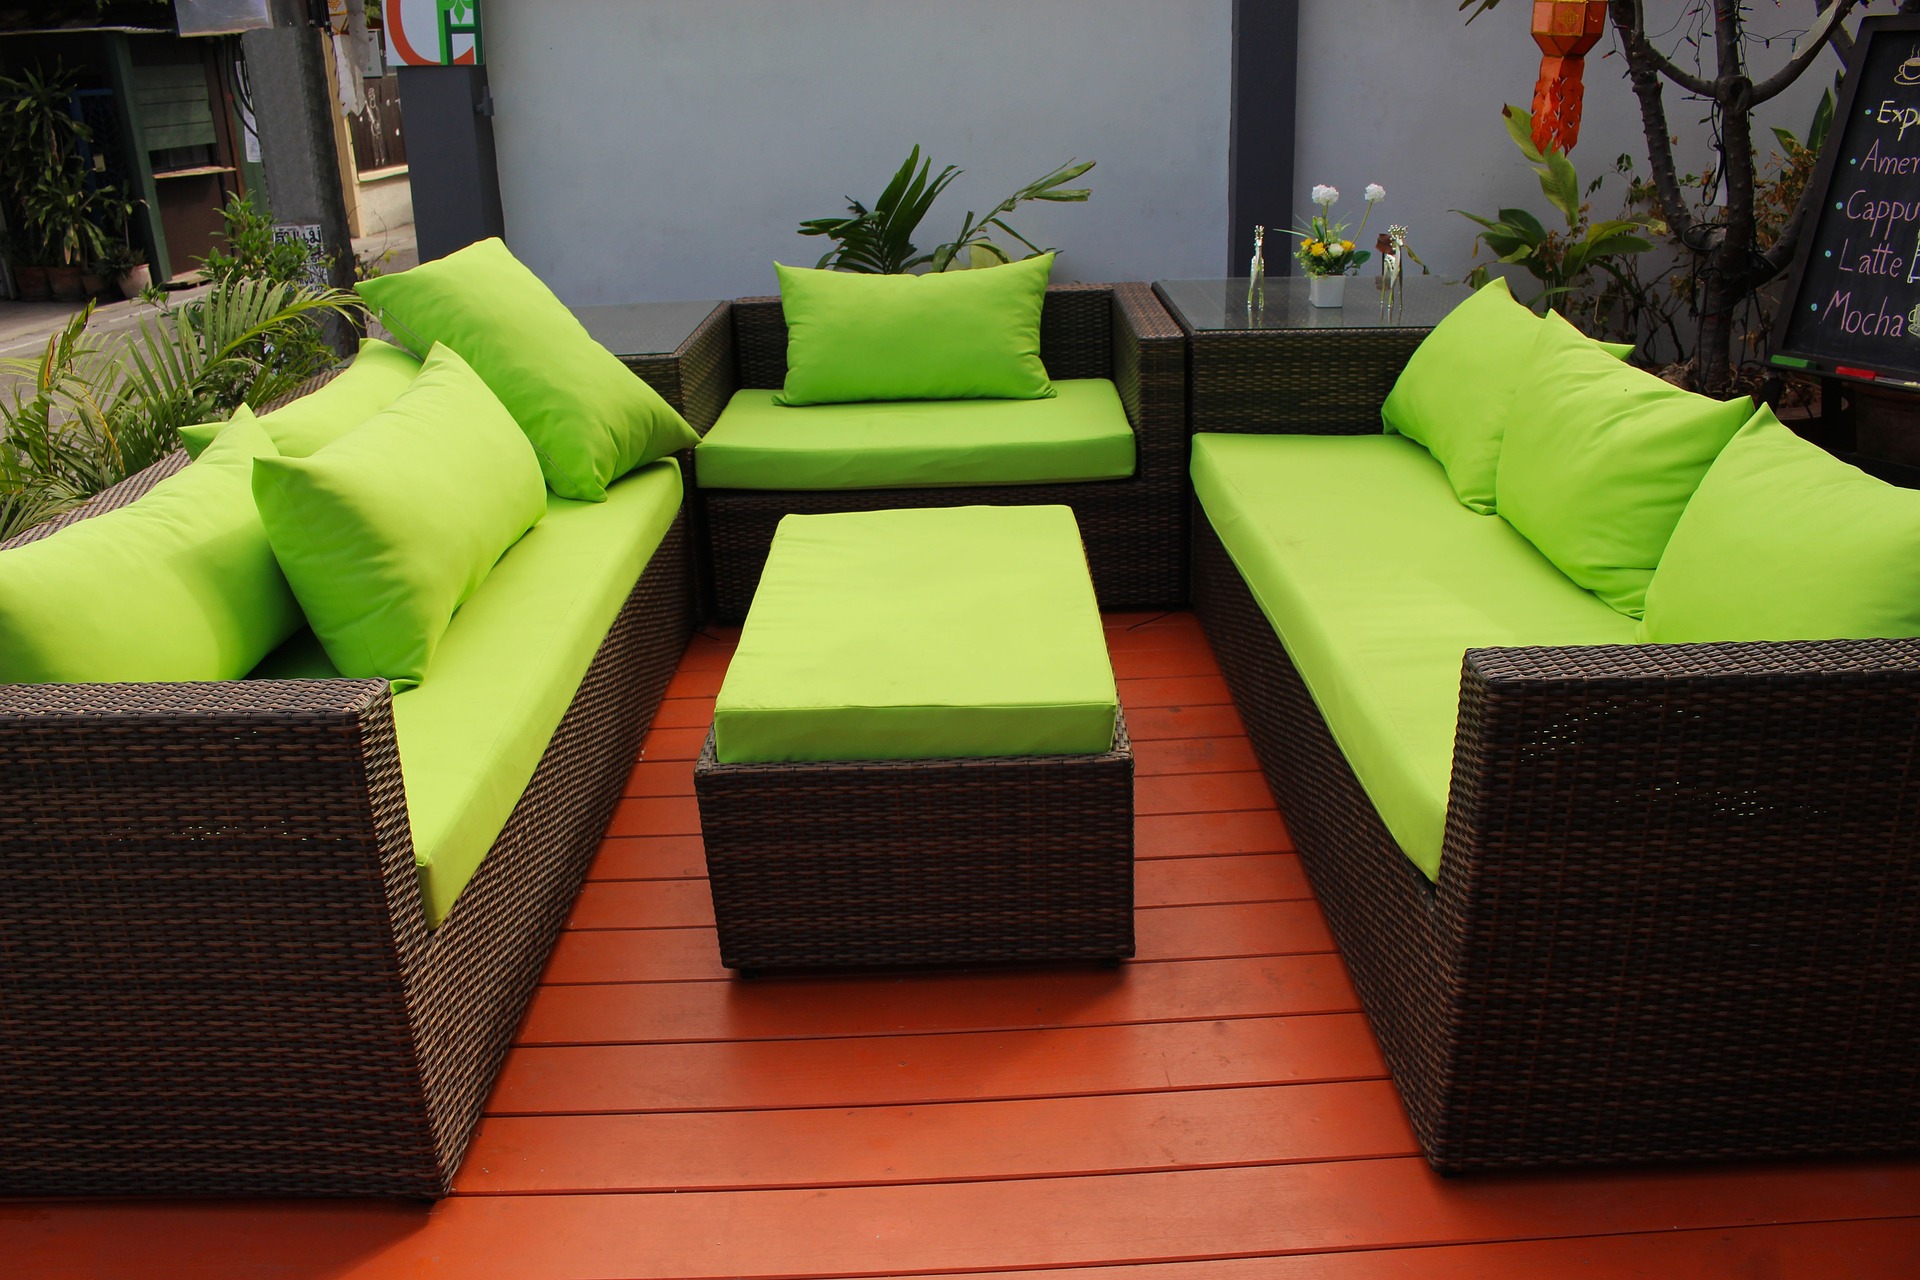 Top Tips To Make Your Garden Patio The Envy Of Your Neighbors